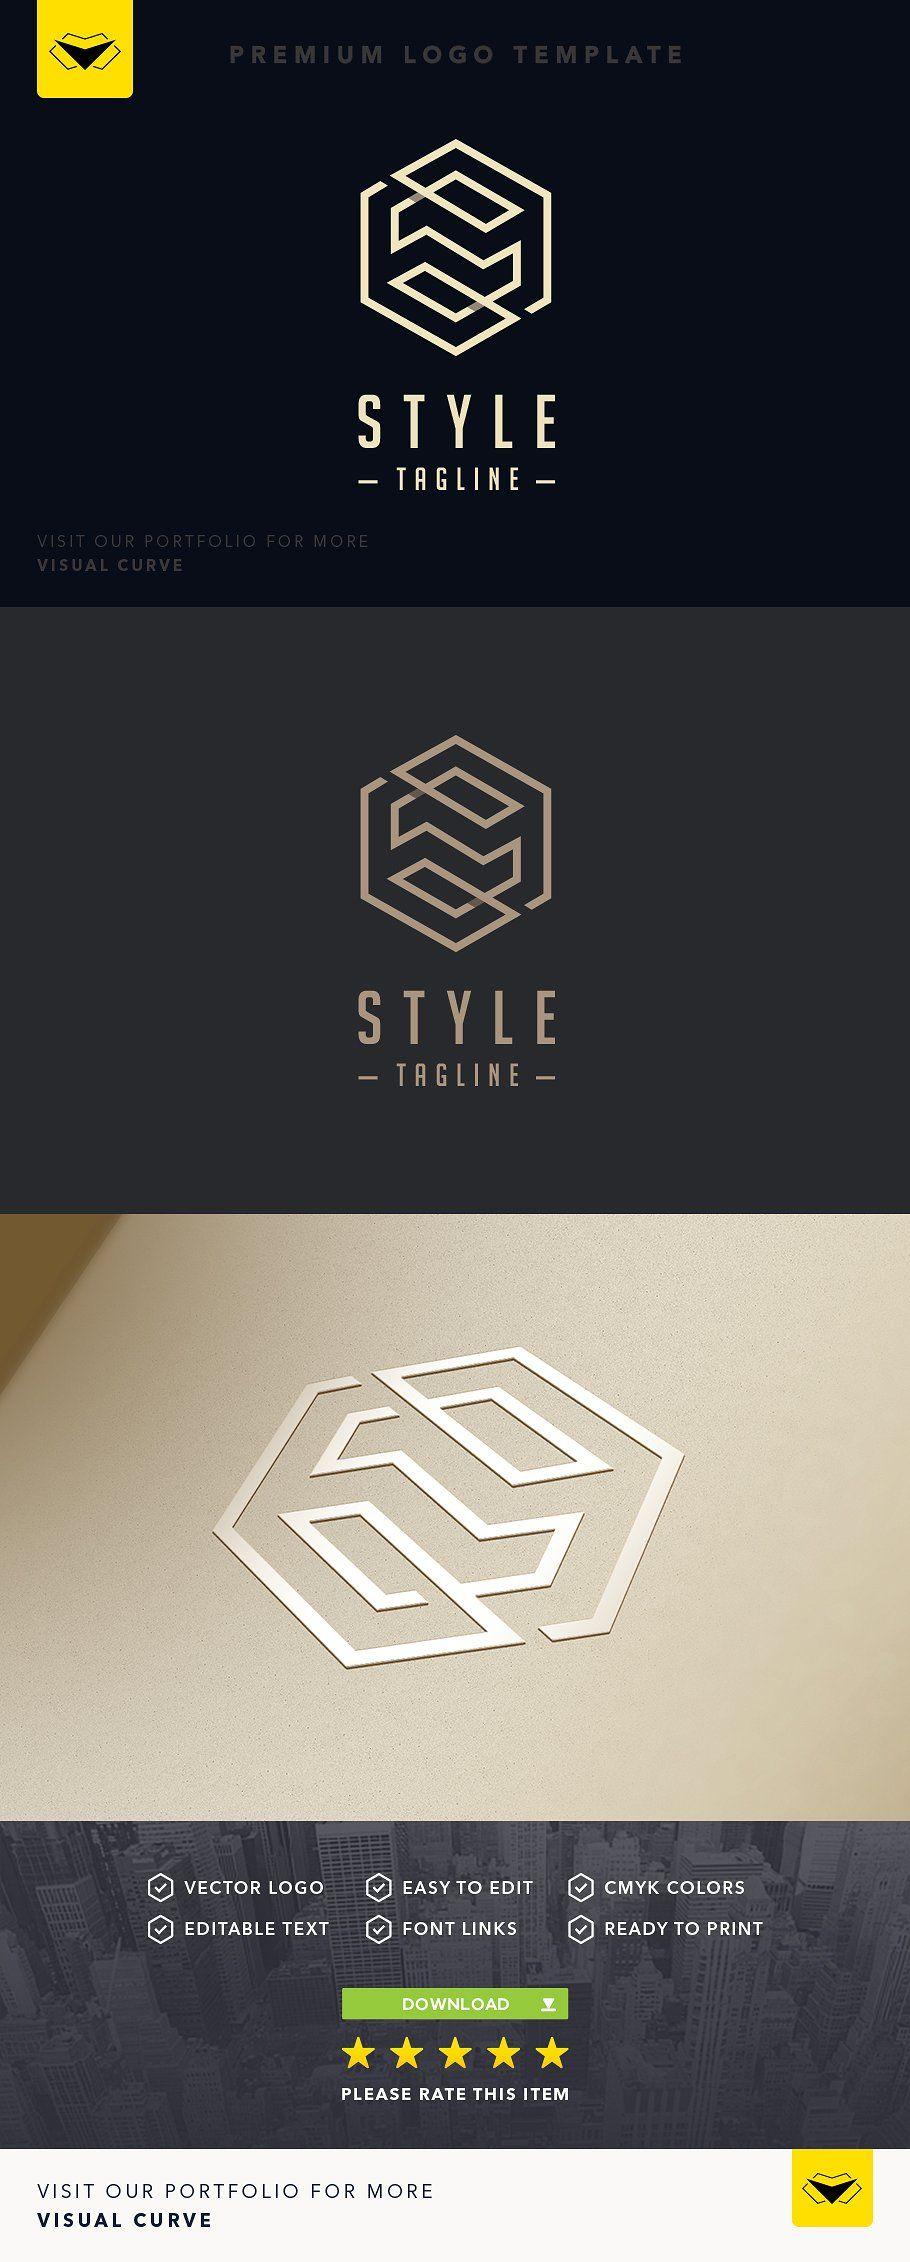 Hexagon Corporate Logo - Letter S Logo by VisualCurve on @creativemarket brand, business ...